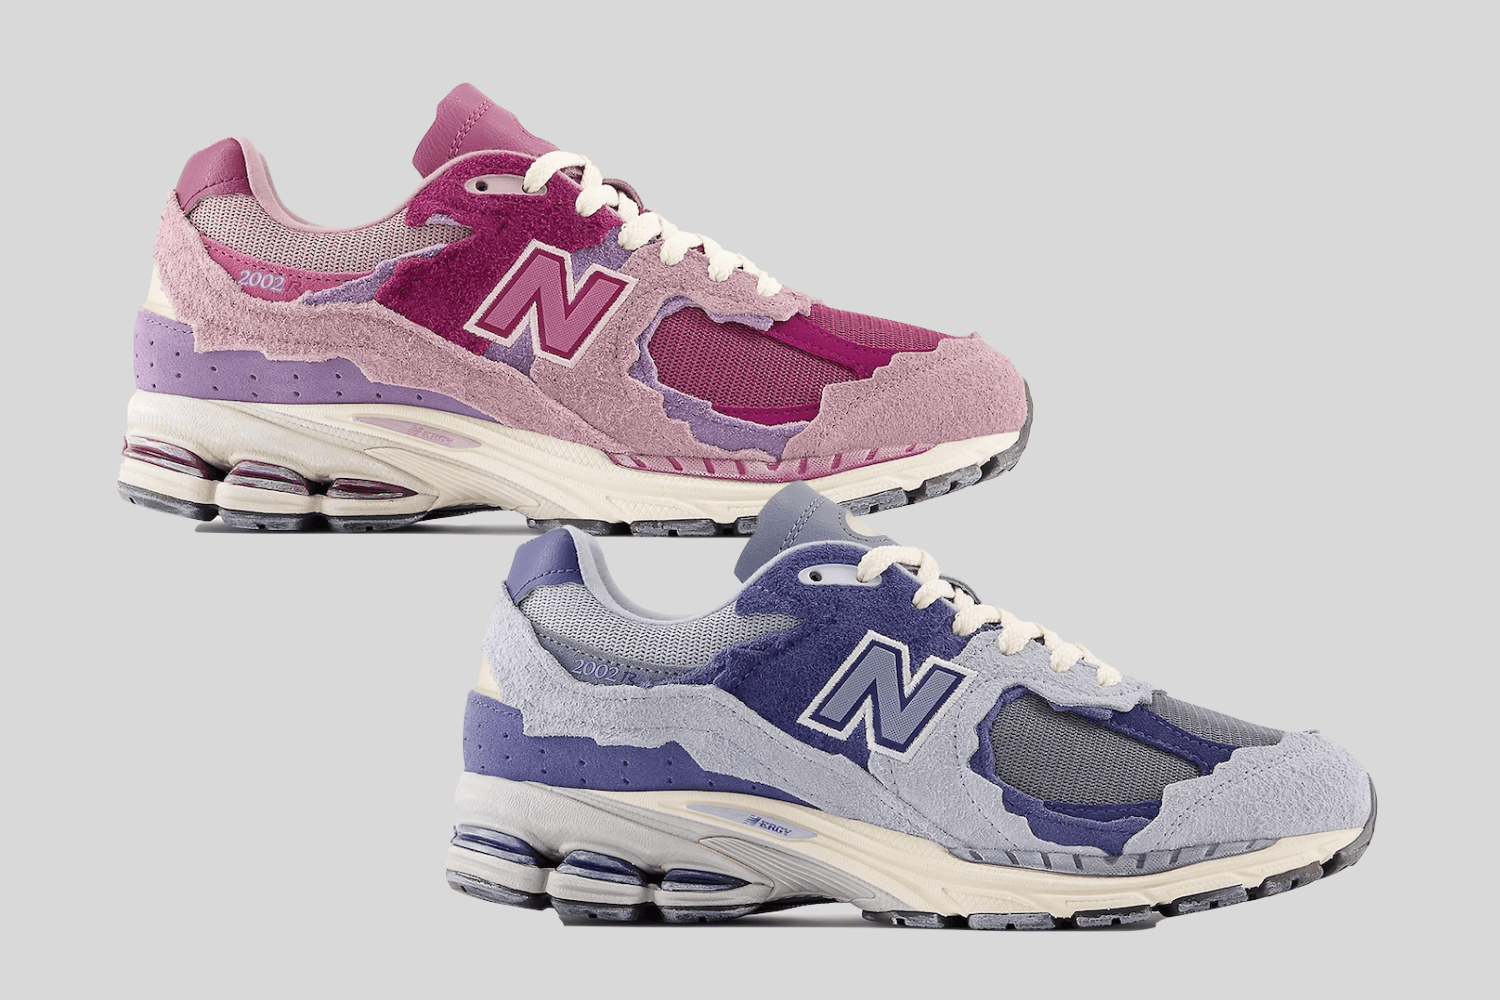 Two more 'Protection Pack' colorways for the New Balance 2002r